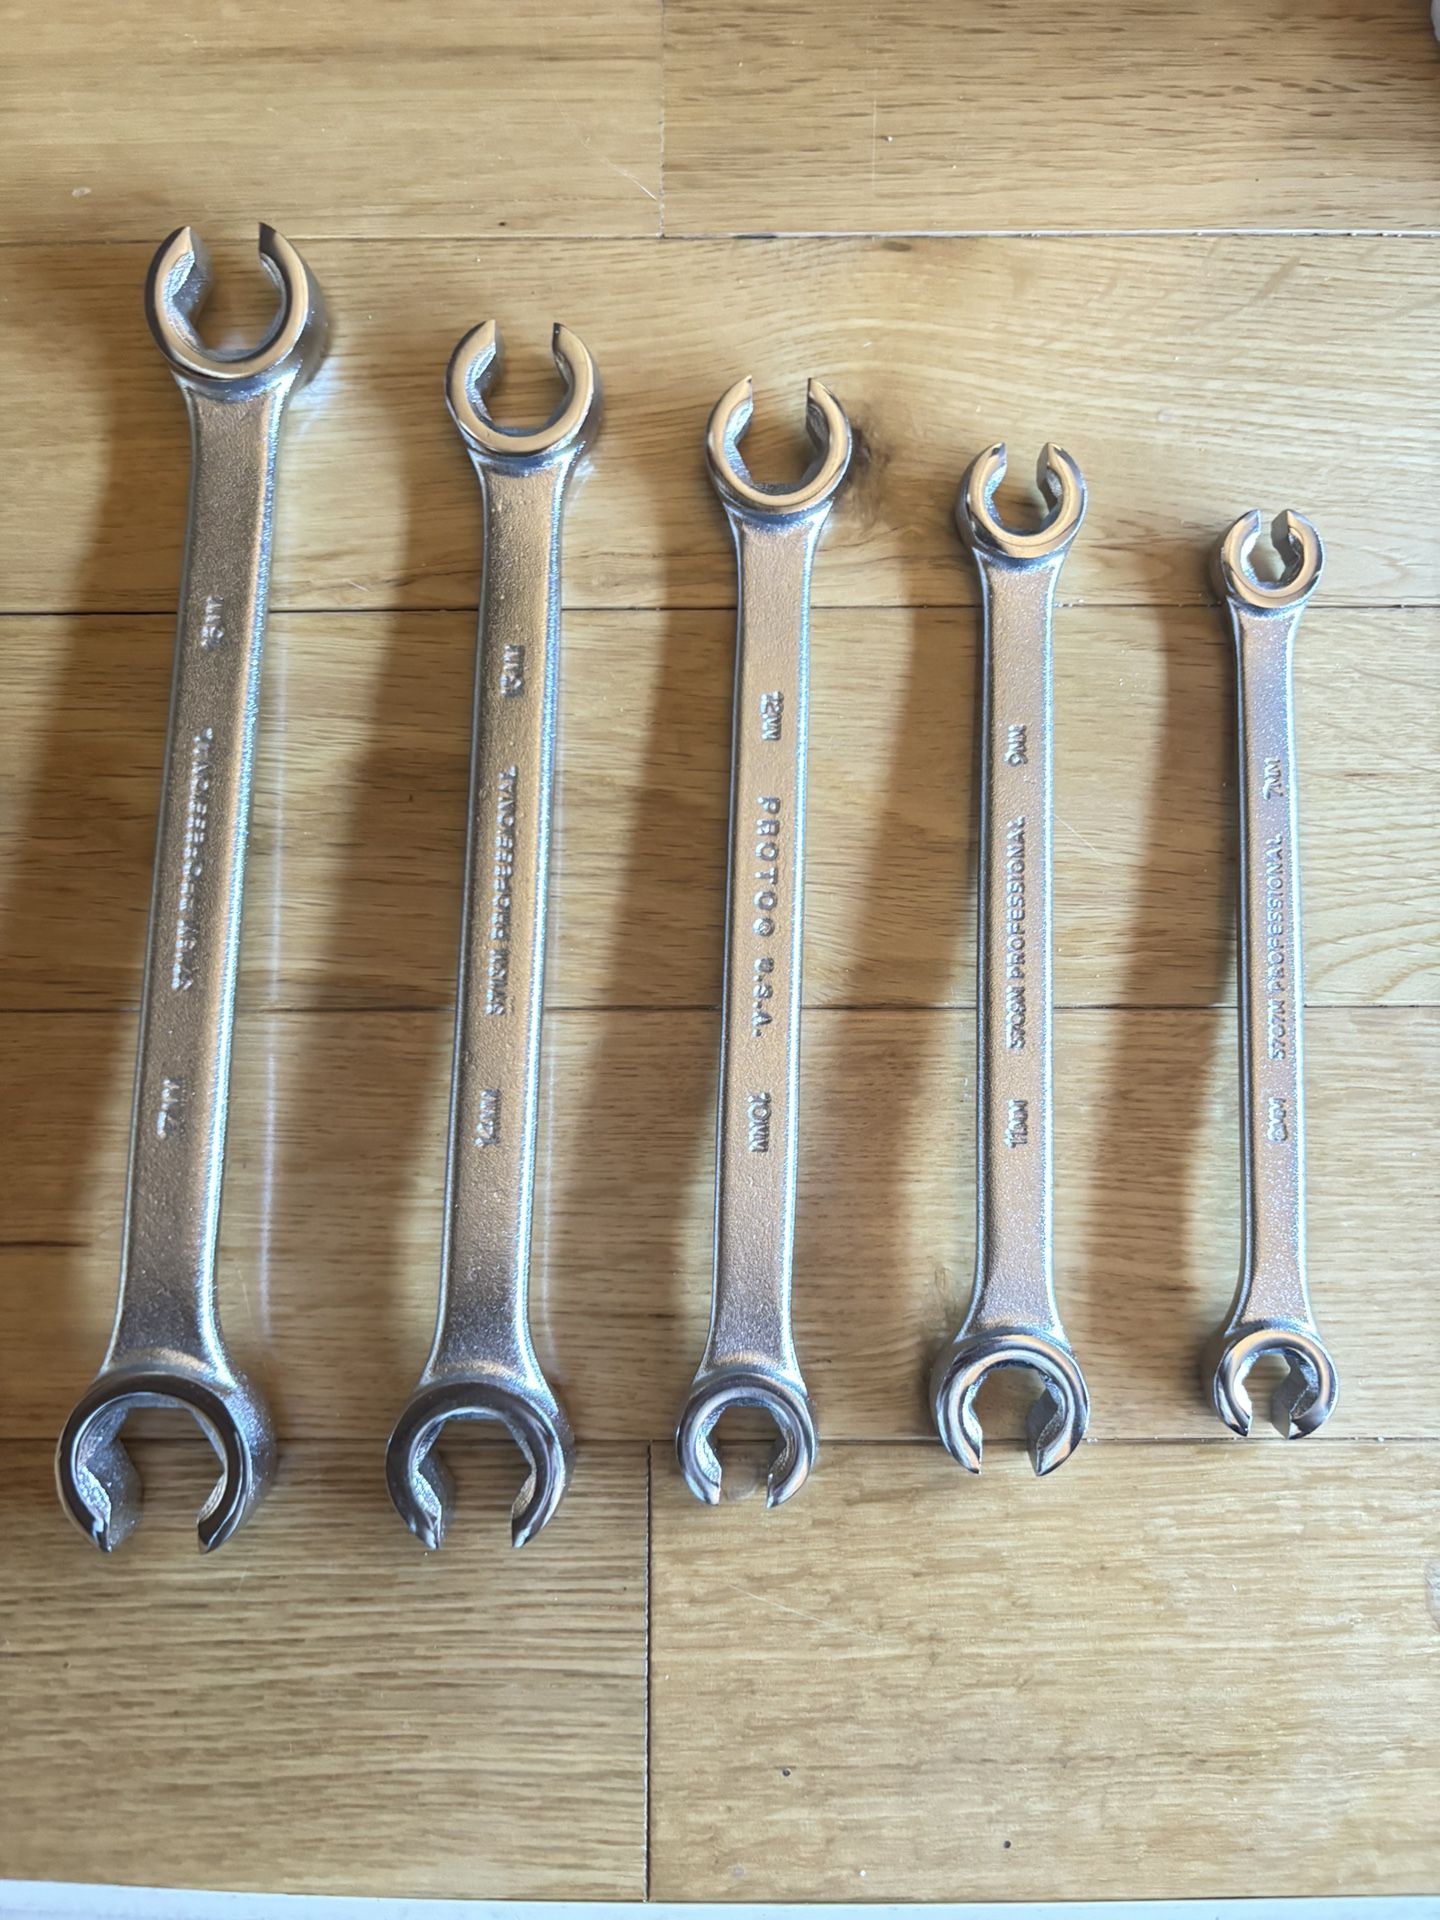 PROTO Flare Nut Wrench Set: Alloy Steel, Satin, 5 Tools, 7mm to 17 mm Range of Head Sizes